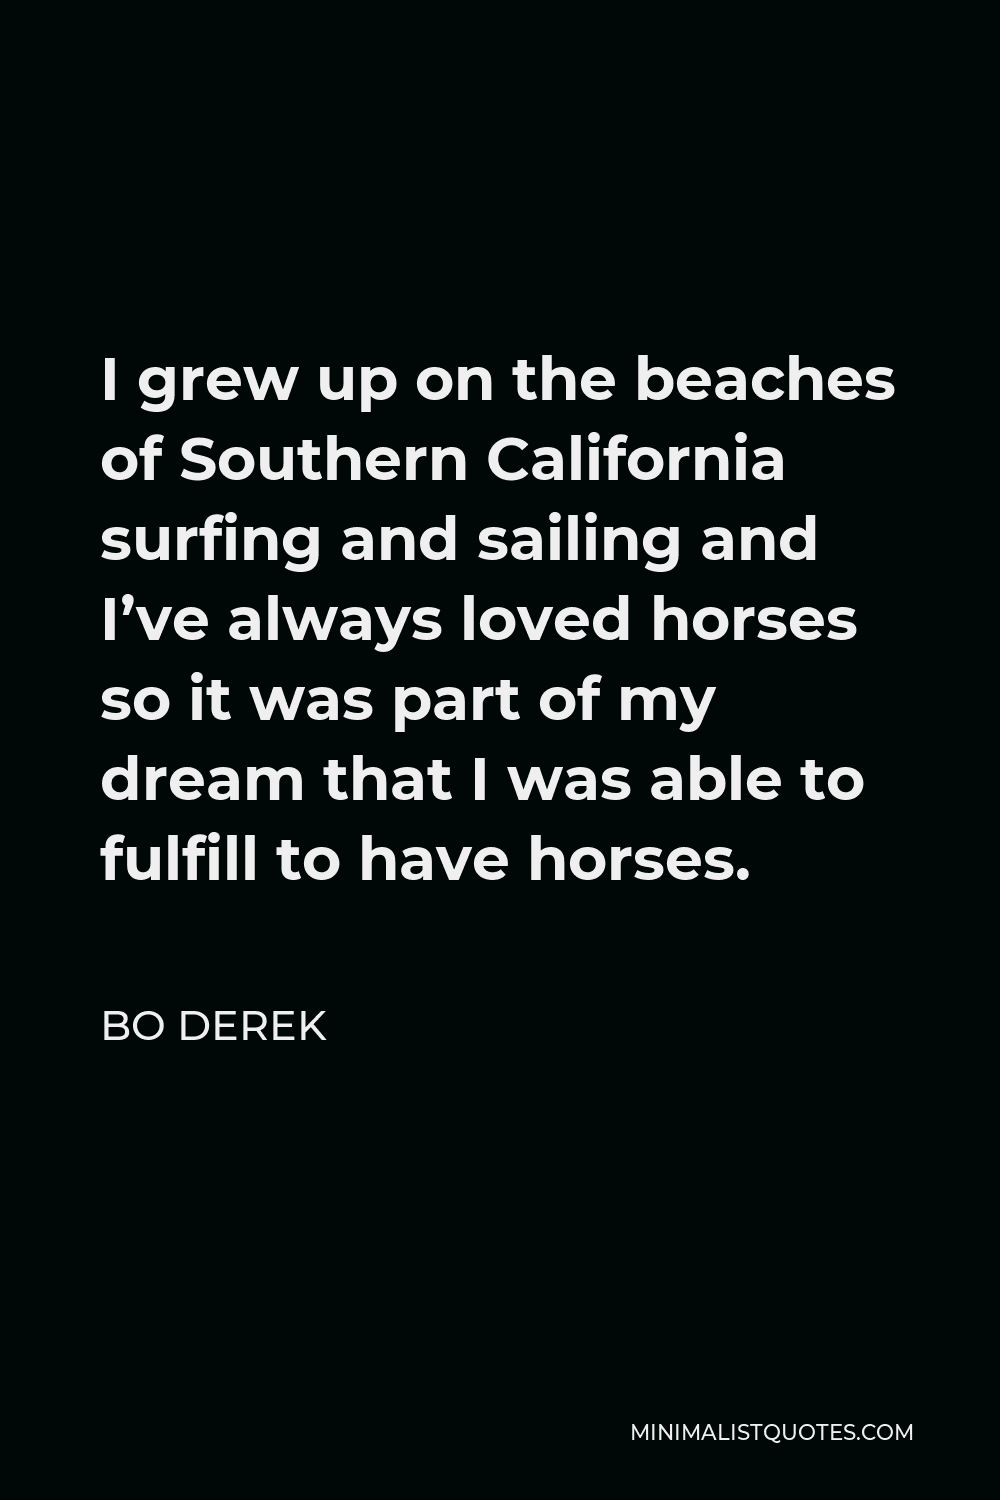 Bo Derek Quote - I grew up on the beaches of Southern California surfing and sailing and I’ve always loved horses so it was part of my dream that I was able to fulfill to have horses.